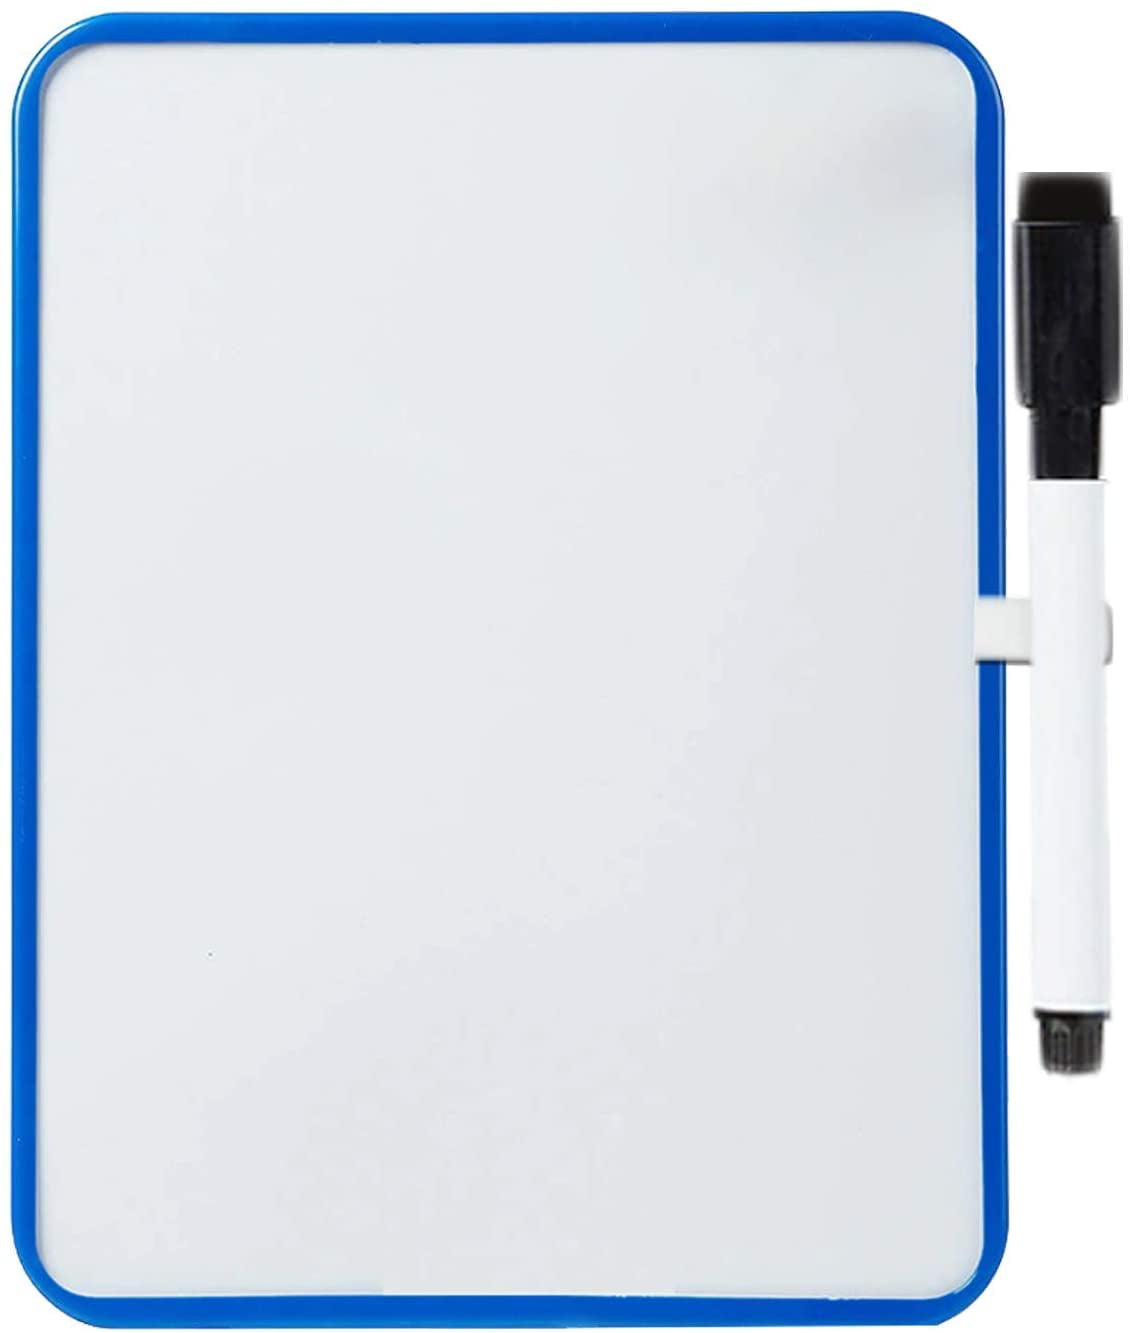 Classroom set of 20 Dry Erase  9"x12" Student Whiteboard/Markerboard ships USPS 